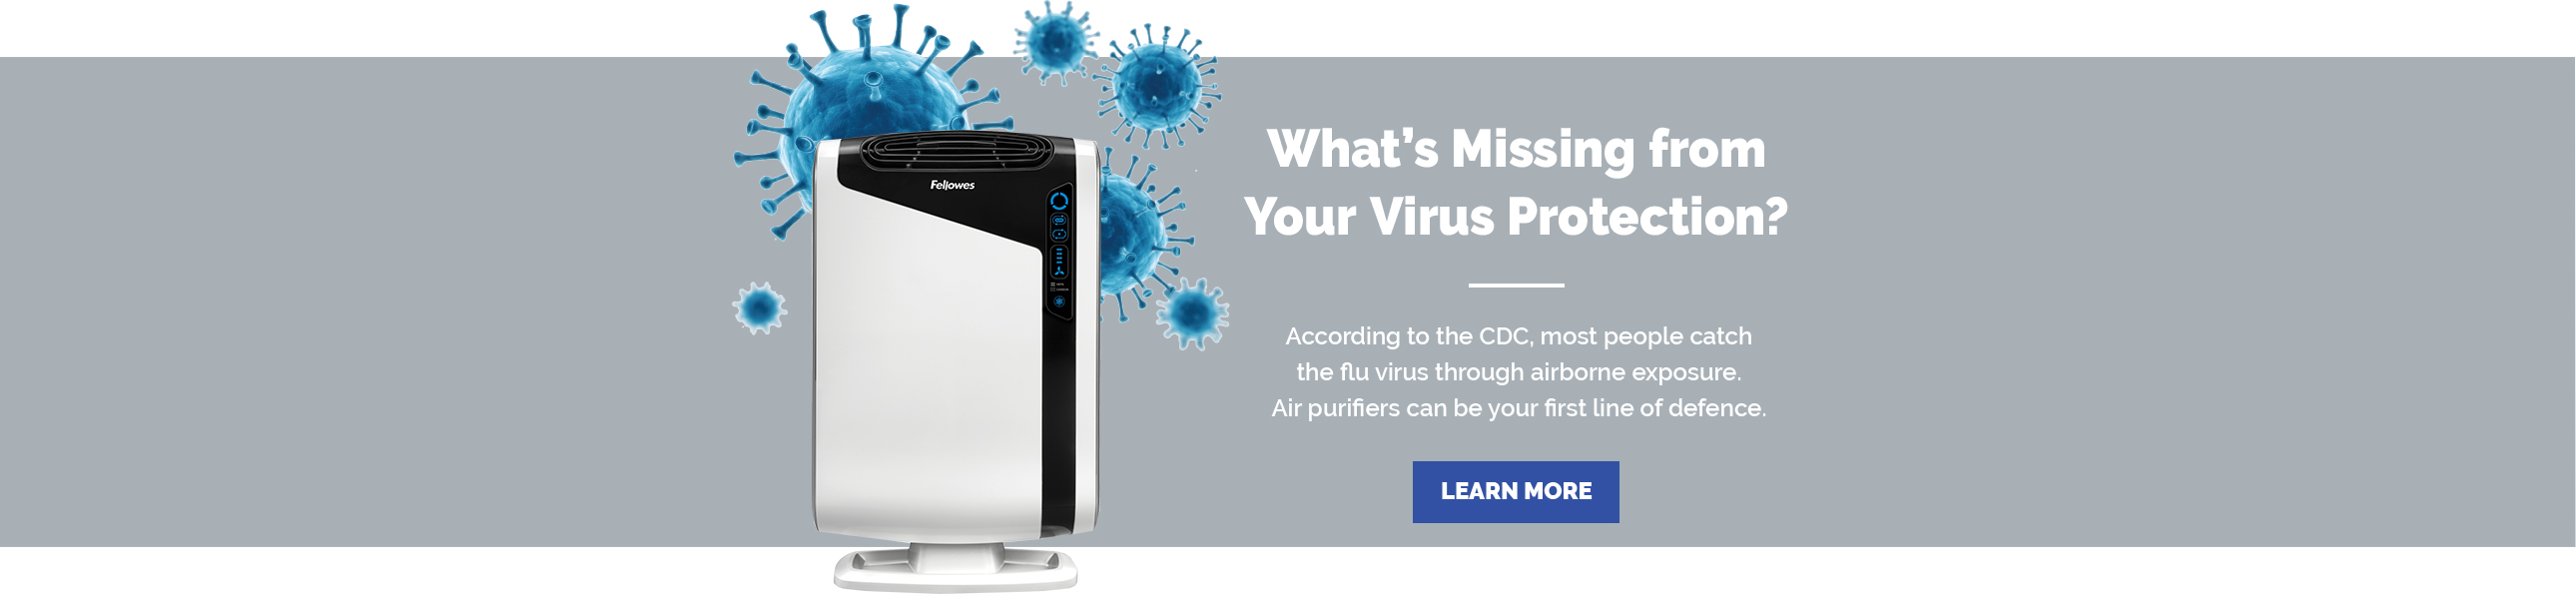 What's missing from your Virus Protection?